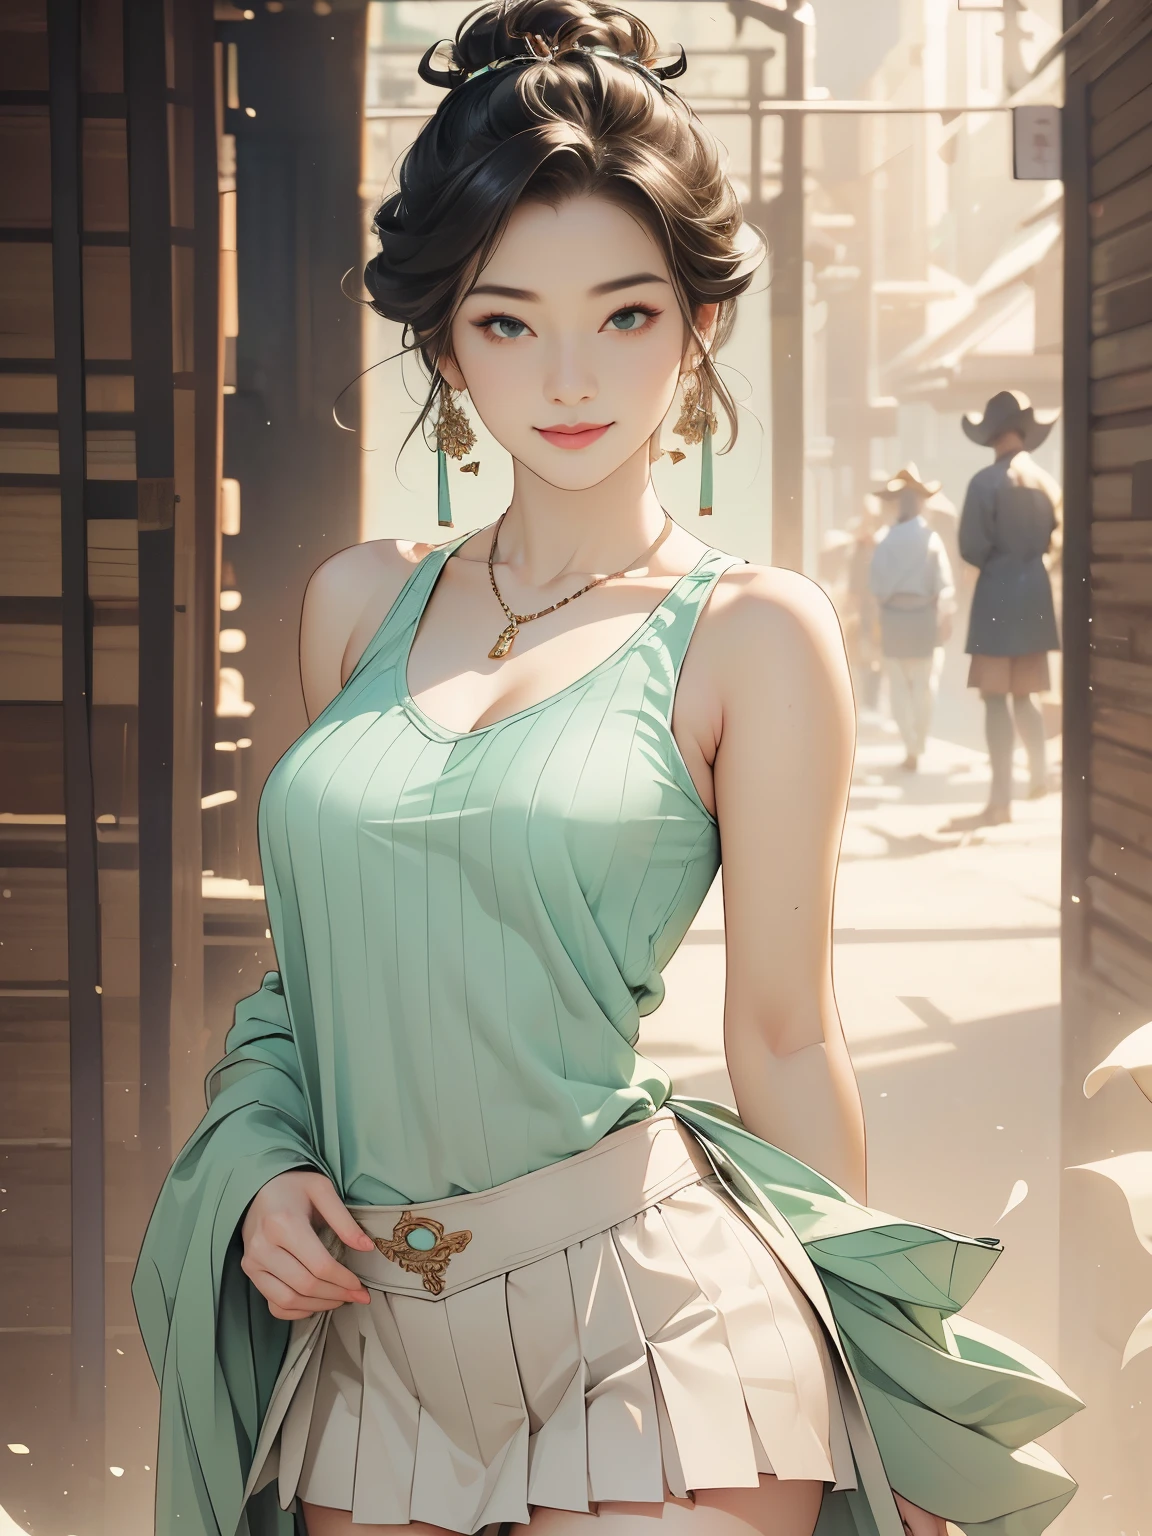 ((((highest quality))))、(((Ultra-precision CG16K wallpaper)))、(((masterpiece)))、(((Super detailed)))、(((super extreme details)))、１people&#39;s women、mature woman、24 year old woman、((Japanese face))、((very beautiful face))、((Zuo々Ki Nozomi:1.5))、((straight short bob hair:1.3、blunt bangs))、(shiny brown hair)、beautiful delicate eyes、brown eyes、raised eyebrows、high nose、small nostrils、small mouth、seductive lips、beautiful breasts、((C cup size breasts))、cleavage、plump body、(Chubby body type)、perfect proportions、perfect anatomy、perfect composition、beautiful detailed shading、beautiful natural lighting、beautiful detail glow、Depth of the bounds written、(((High chroma)))、(((real:1.9)))、((vivid:1.5))、((edge:1.6))、((beautiful skin))、((skin texture))、((Realistic skin feel))、(((thigh-high cowboy shot:1.5)))、((Angle seen from the front:1.5))、((shy smile:1.5))、(Eyes looking at me:1.5)、Bright daylight、Natural light、(((park square:1.3)))、(standing pose:1.5)、(((Mint green color ribbed tank top clothing、White pleated miniskirt clothing:1.6)))、((necklace、Wearing earrings:1.3))、